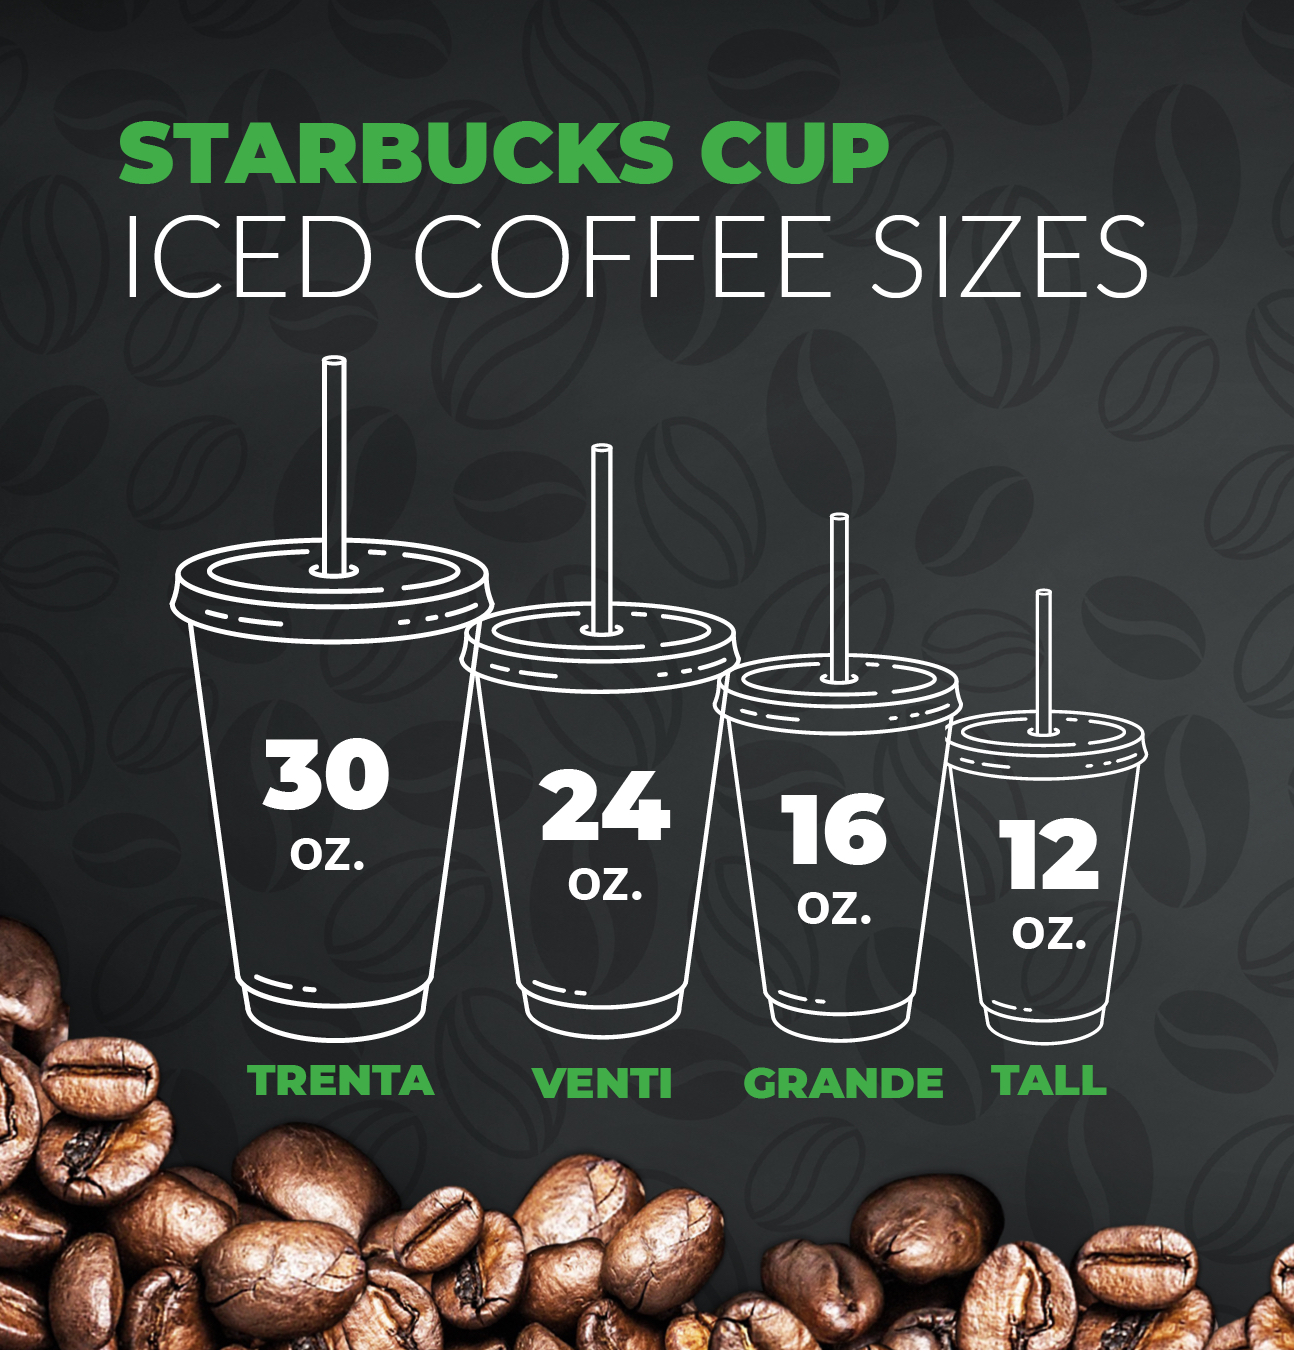 Starbucks Iced Coffee Cup Sizes